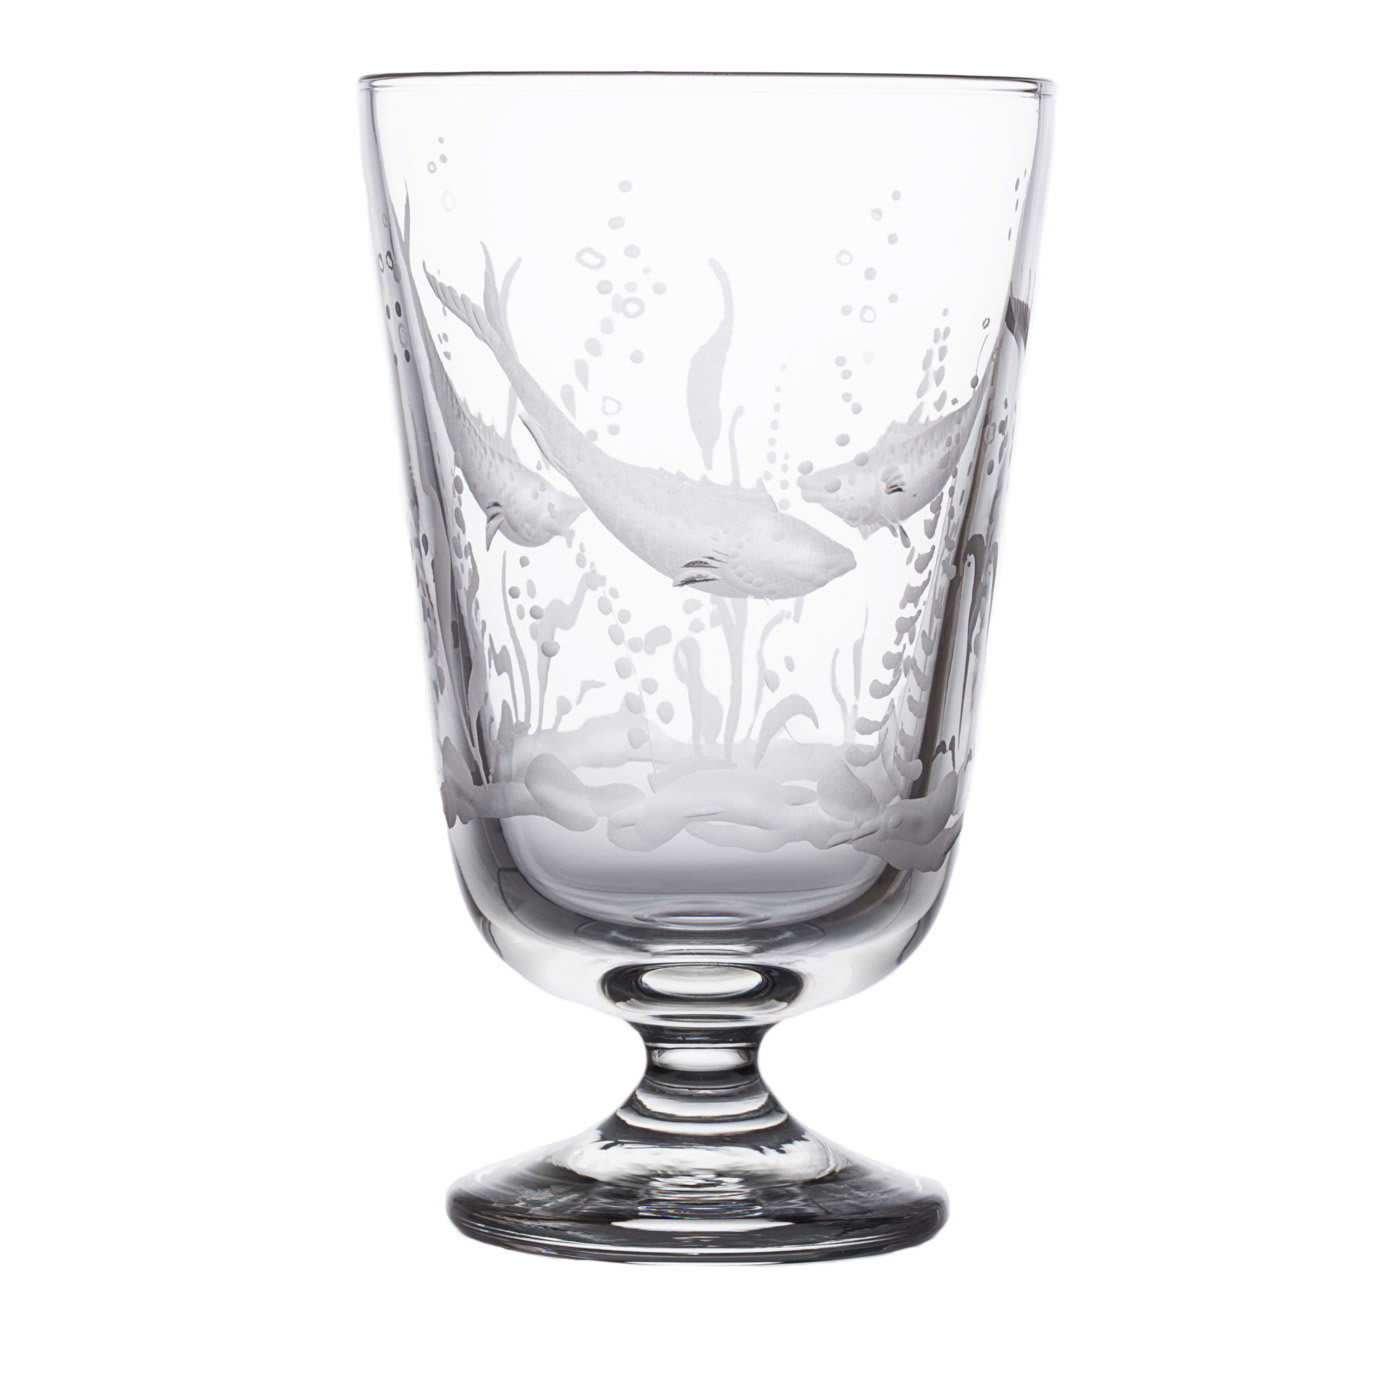 Wine and Water Ejermann Crystal Glasses - Moleria Locchi